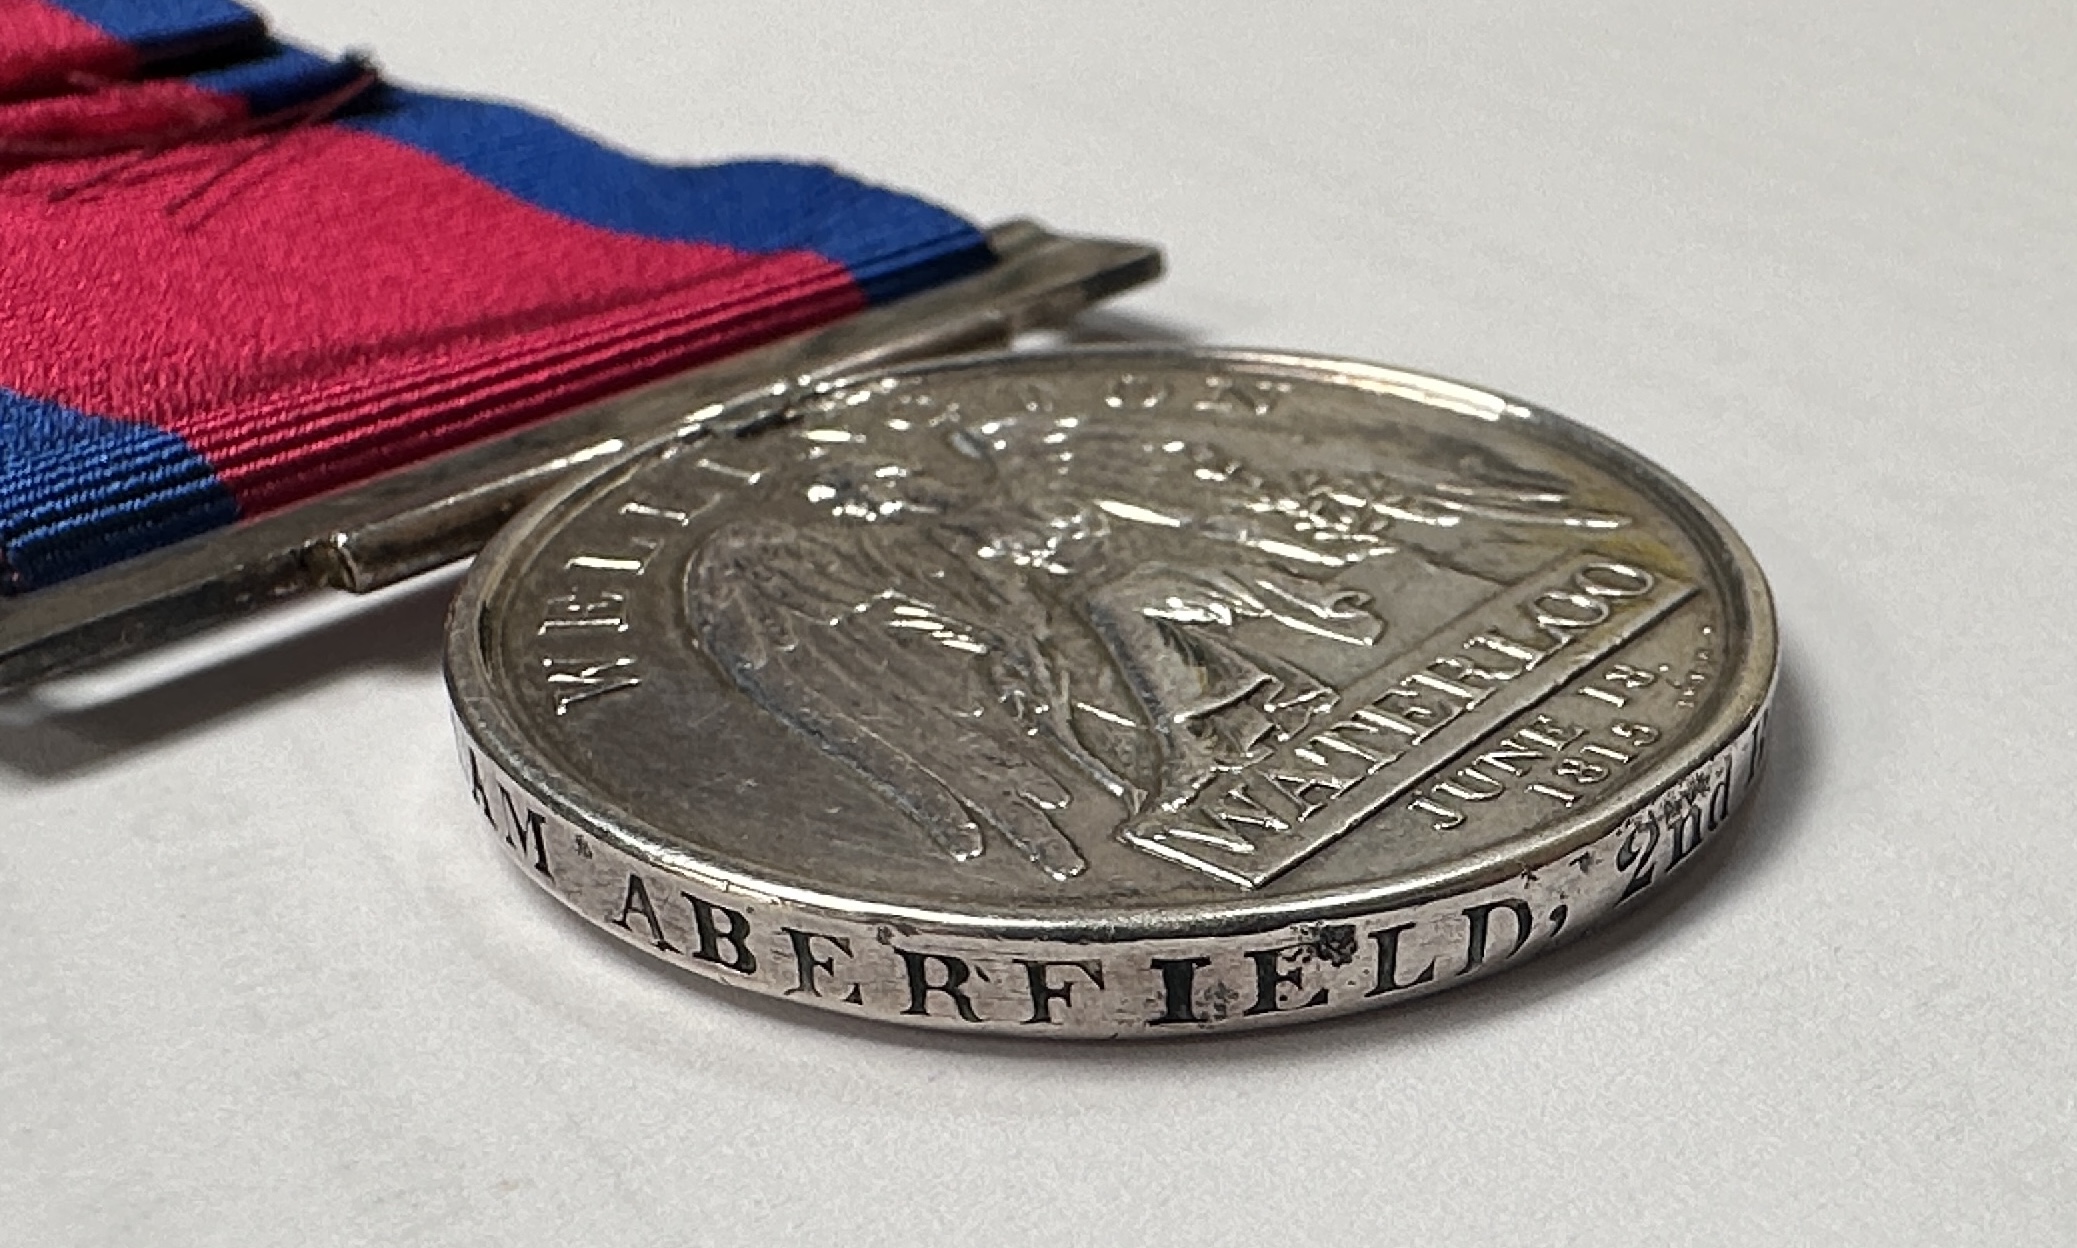 A Waterloo Medal 1815 to William Aberfield 2nd Battalion 95th Regiment of Foot, together with A3 - Image 5 of 6